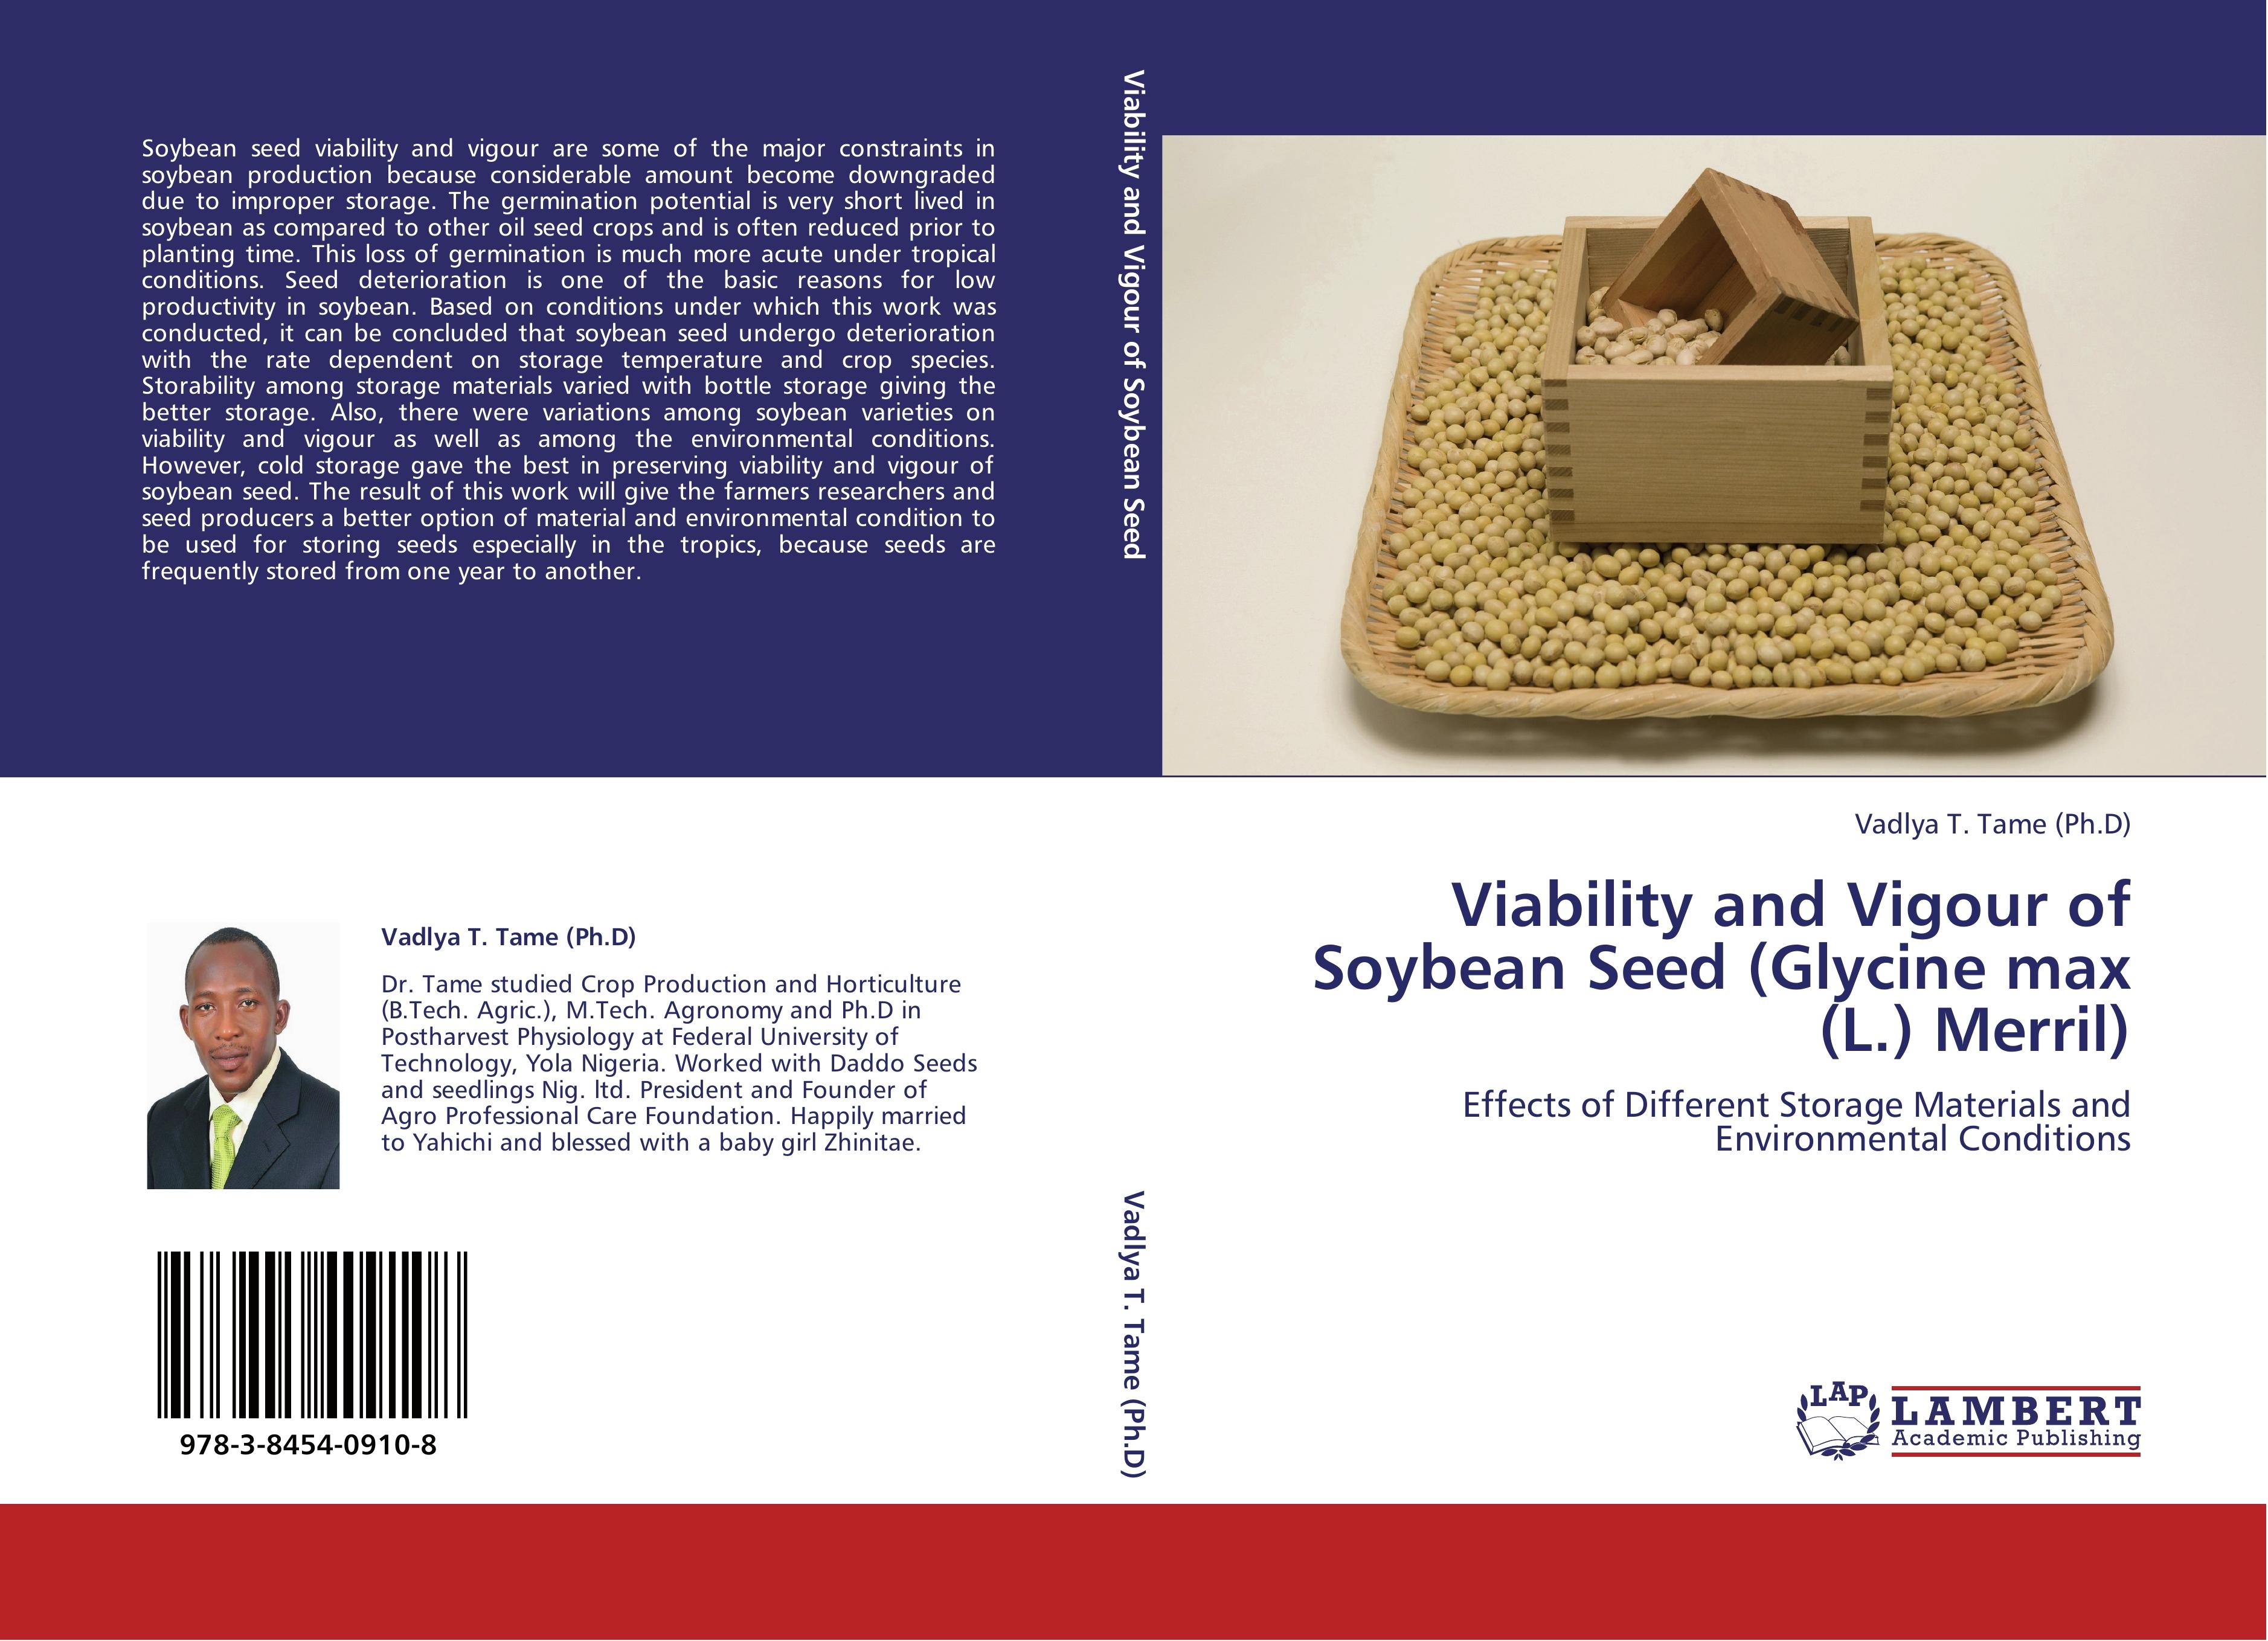 Viability and Vigour of Soybean Seed (Glycine max (L.) Merril) - Vadlya T. Tame (Ph.D)